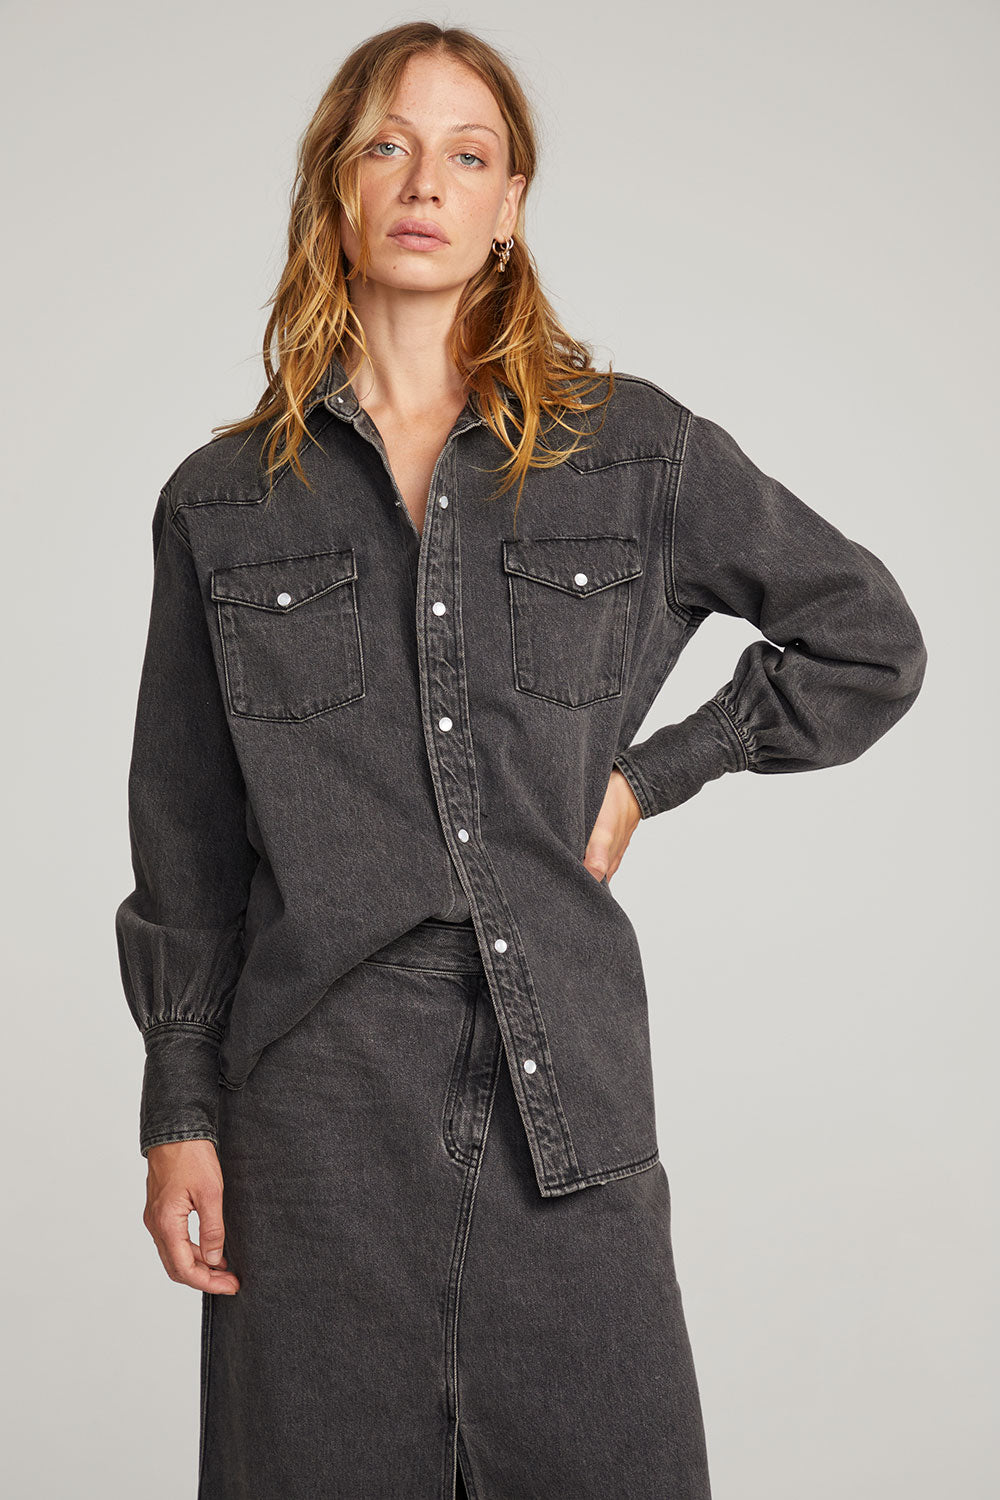 Elk Licorice Button Down WOMENS chaserbrand